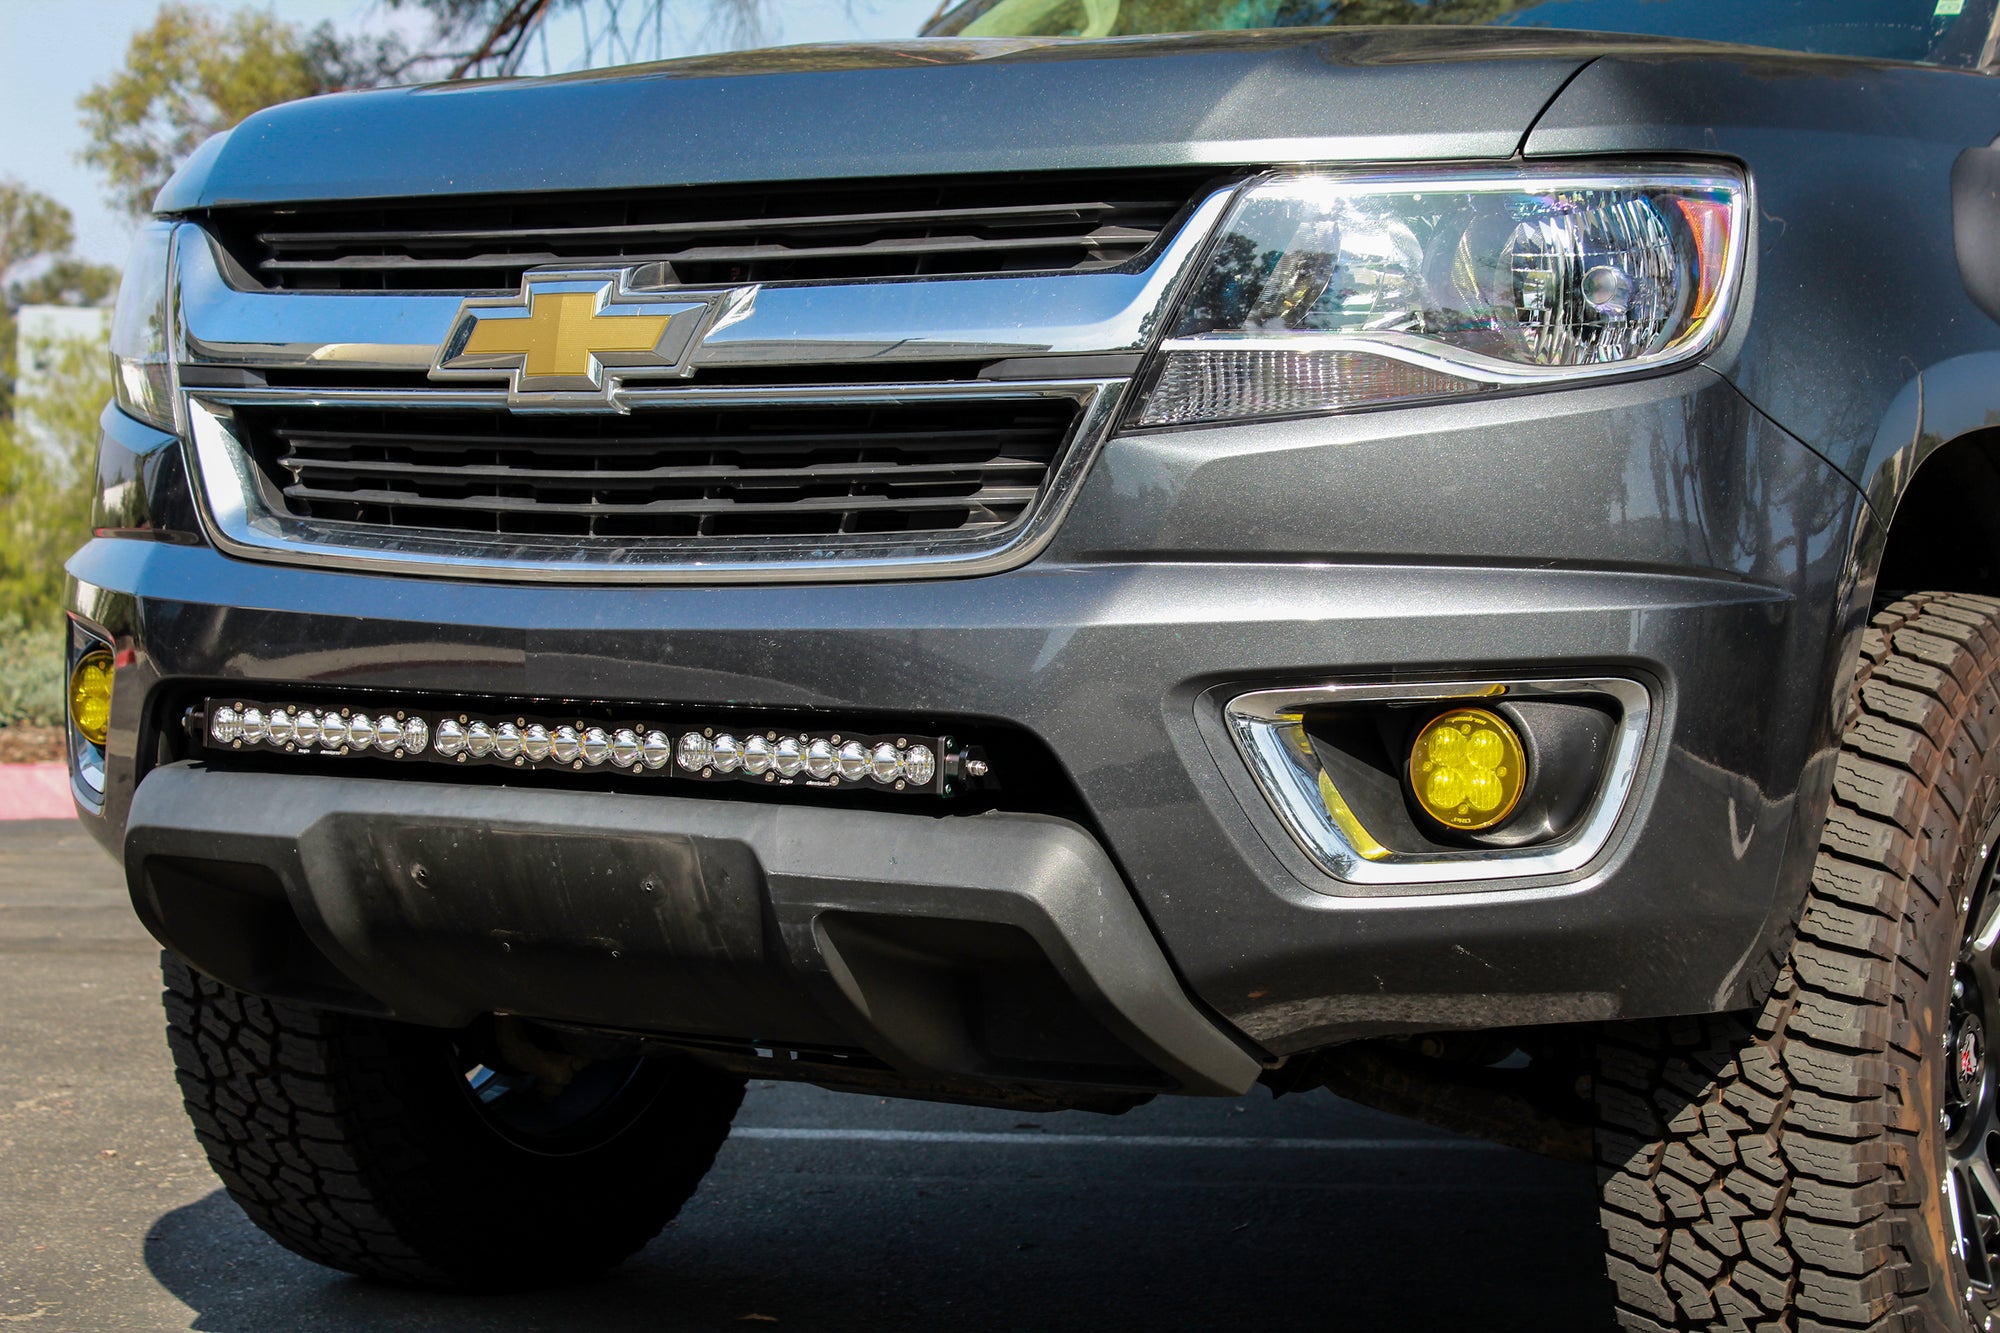 2015-2018 Chevy/GMC Colorado/Canyon Lower Grille Kit